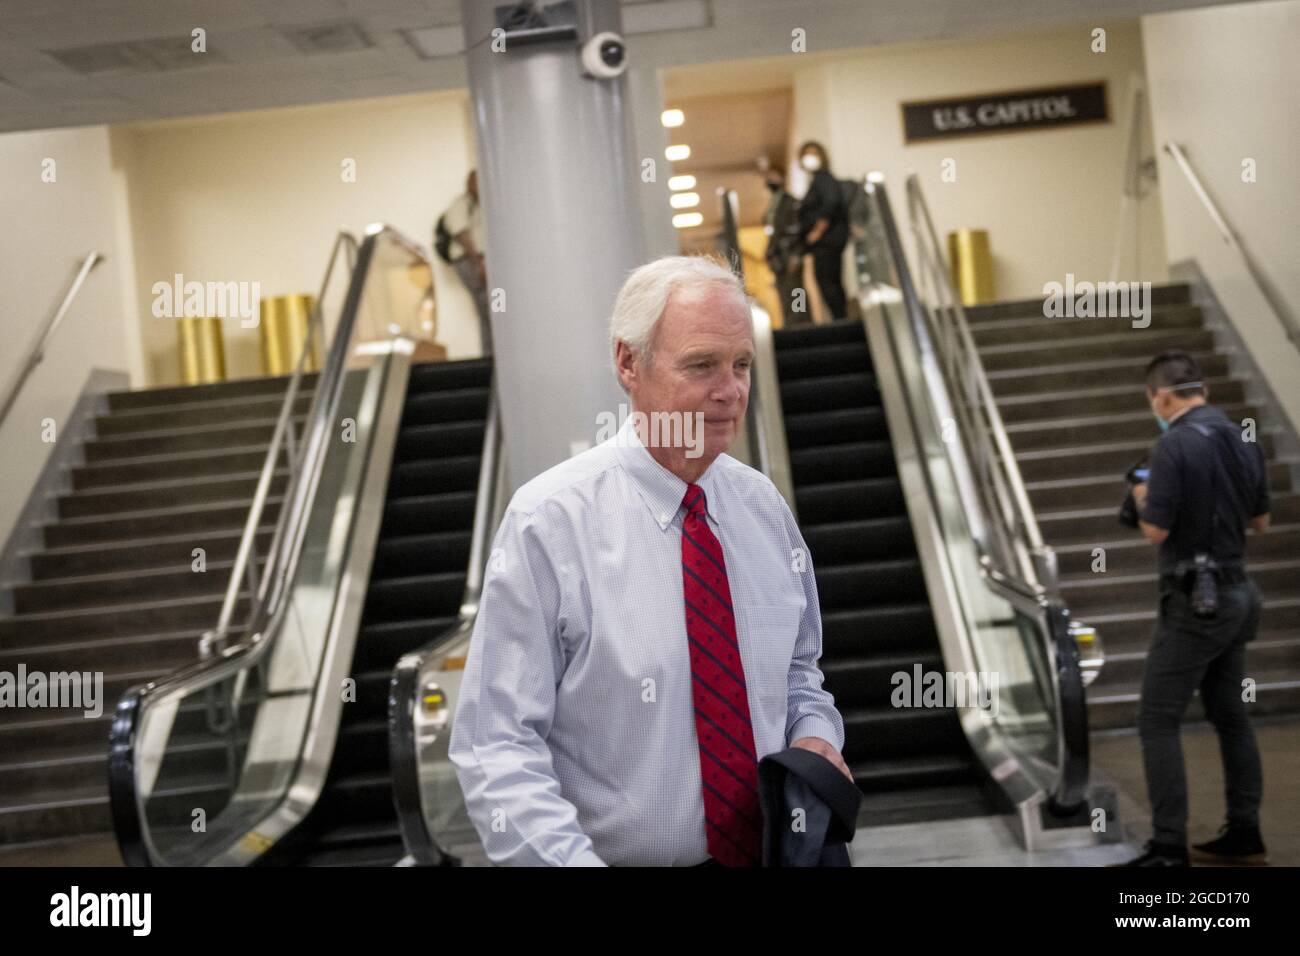 United States Senator Ron Johnson (Republican of Wisconsin) walks through the Senate subway at the US Capitol during a vote in Washington, DC, Saturday, August 7, 2021. Photo by Rod Lamkey/CNP/ABACAPRESS.COM Stock Photo